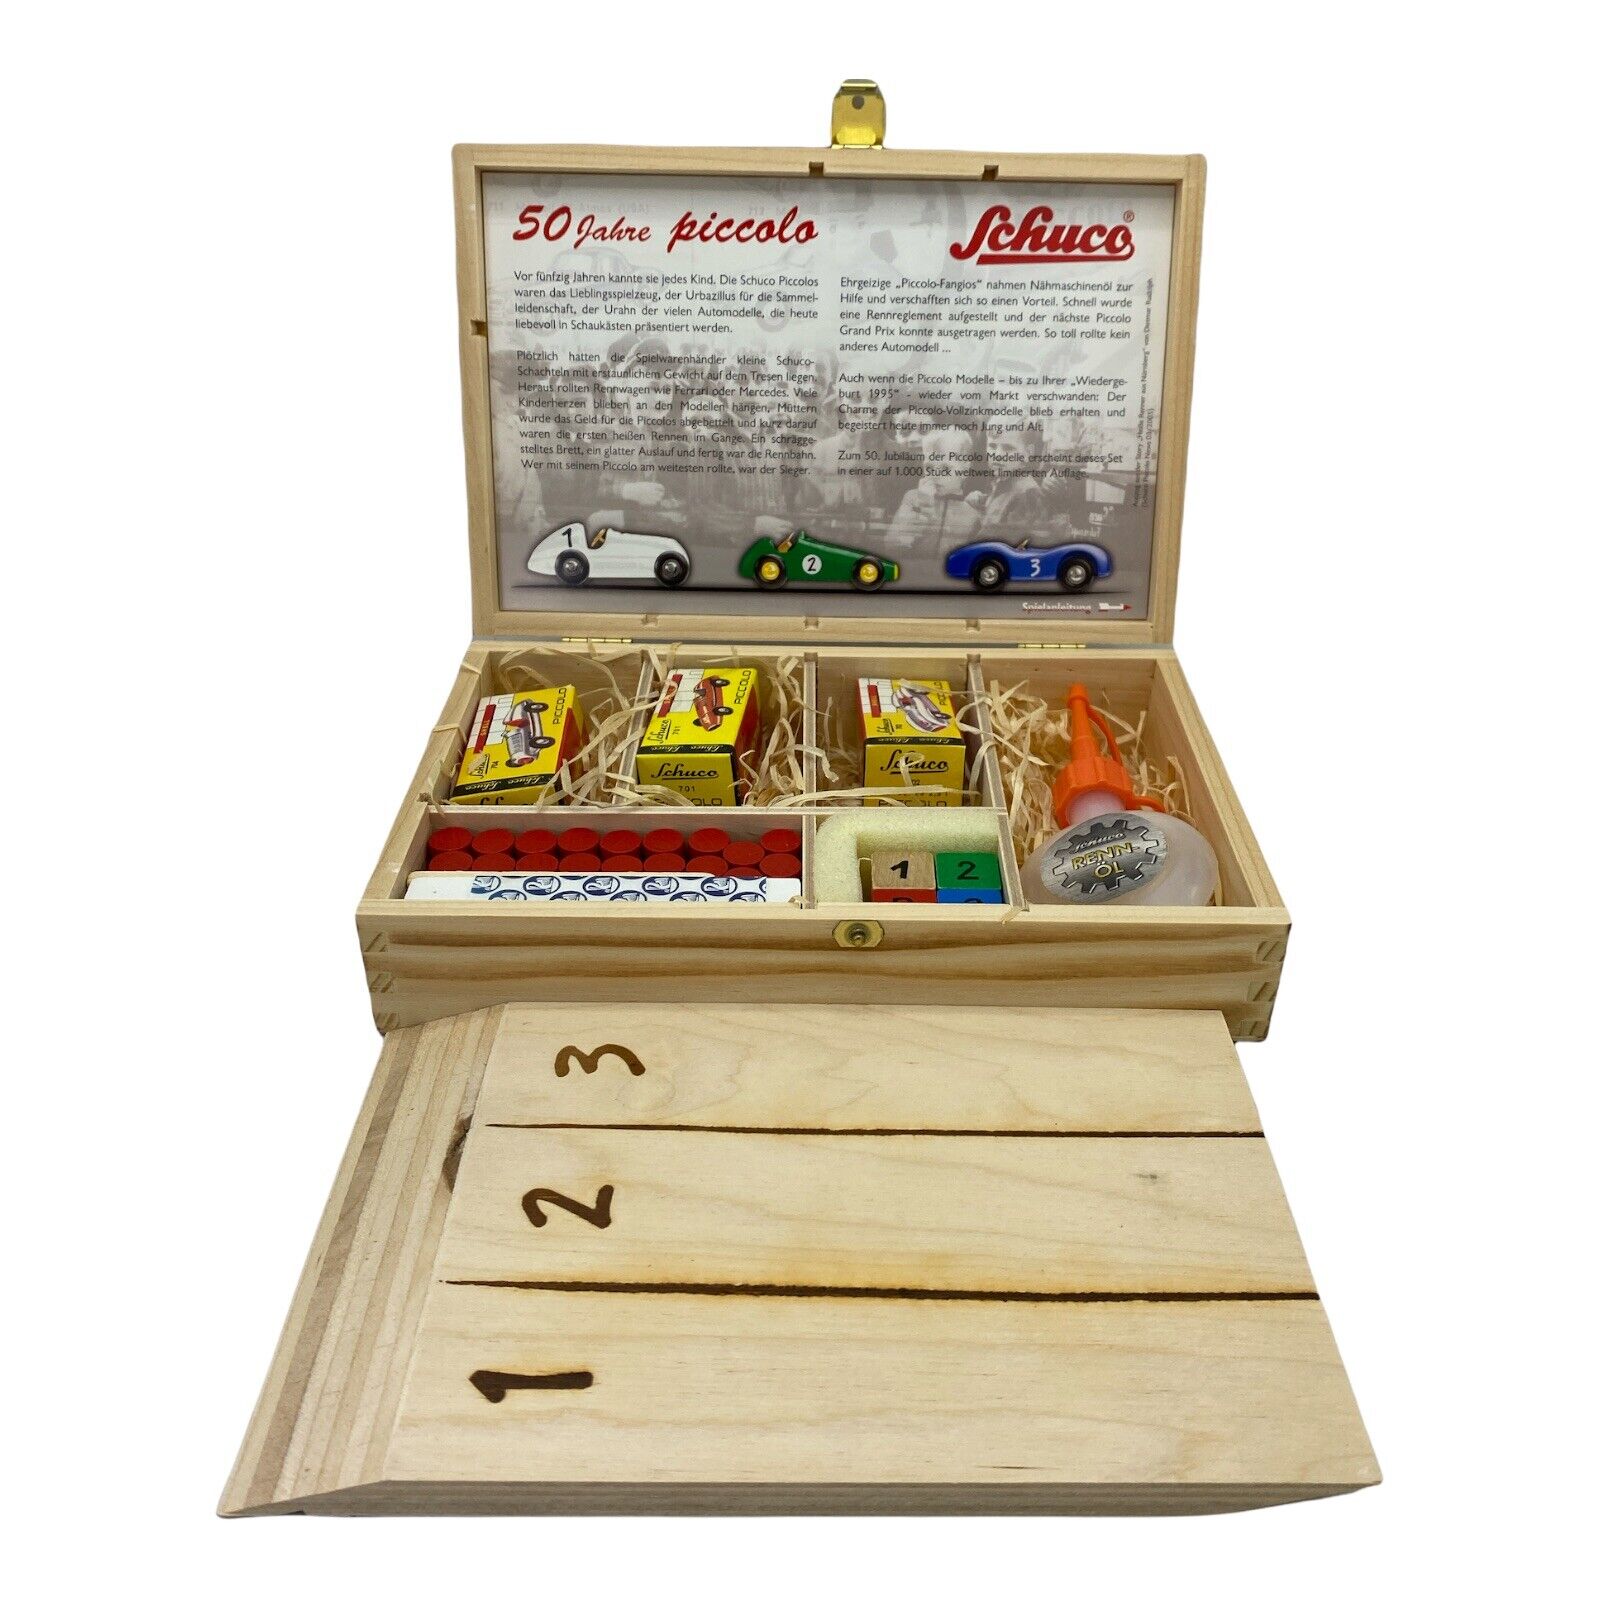 Schuco Piccolo 50 Year Set Cars Limited Edition Race Set in Wood Box USA Seller